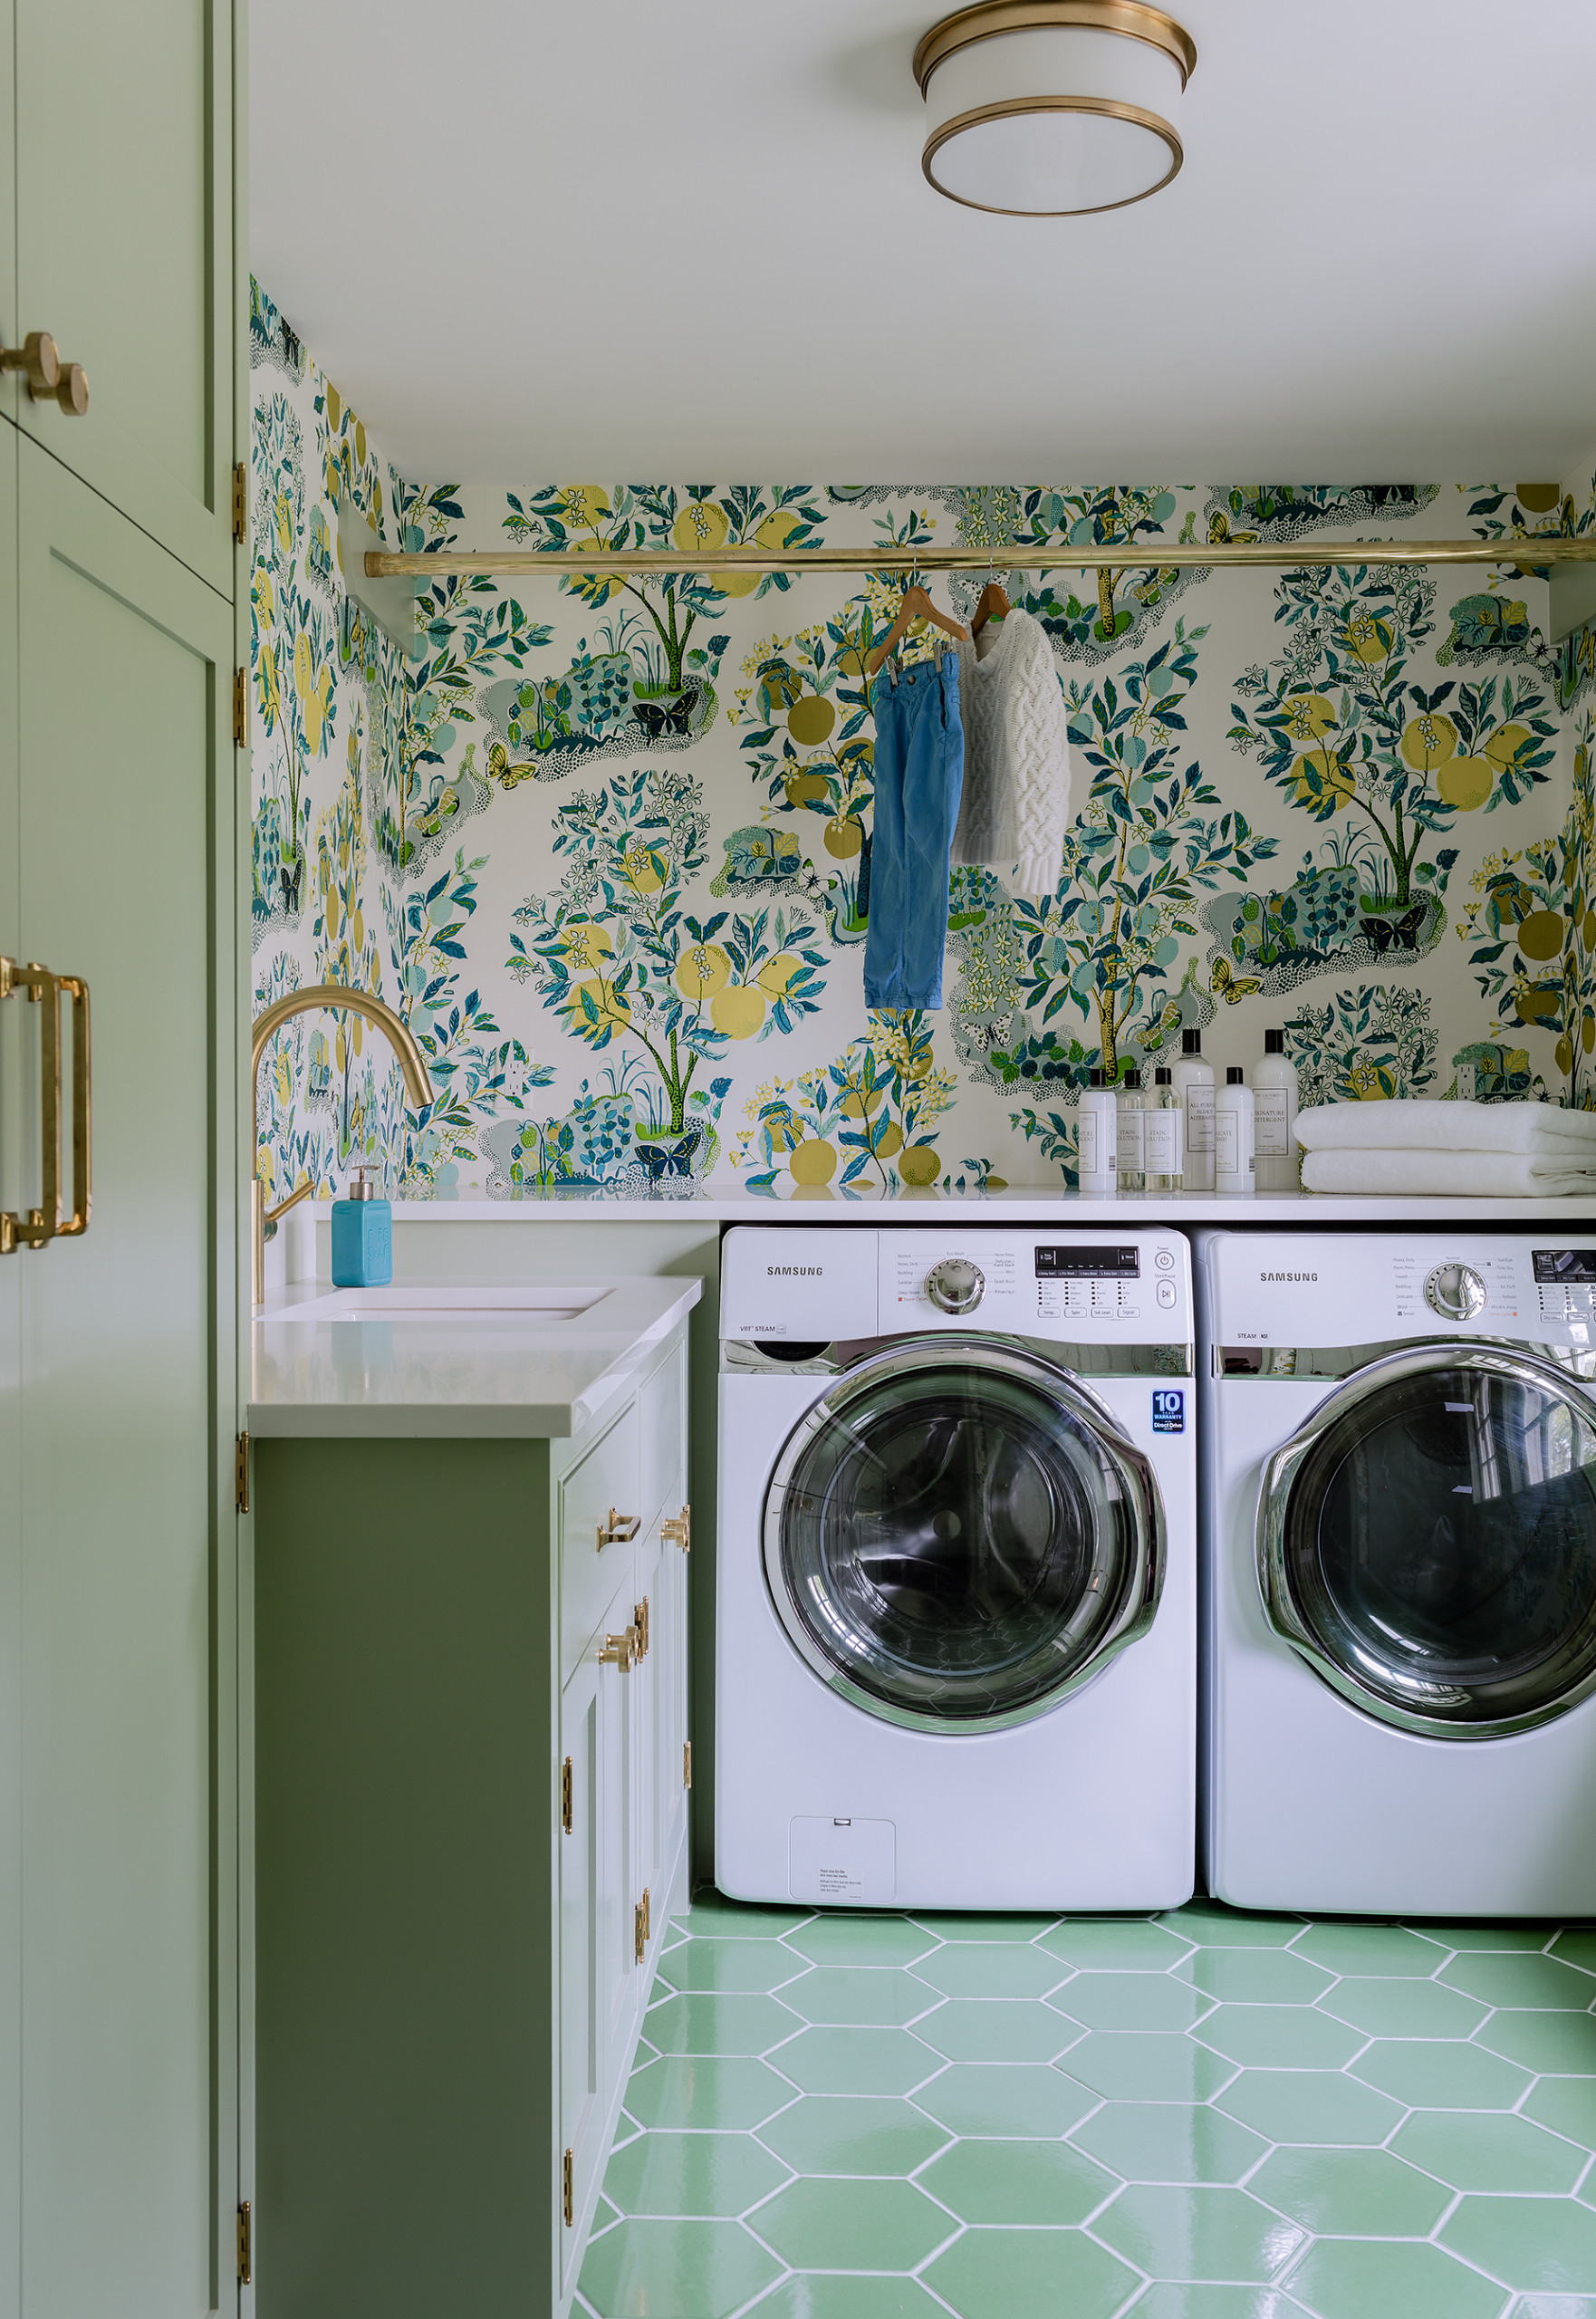 10 Laundry Room Countertop Ideas That You'll Love